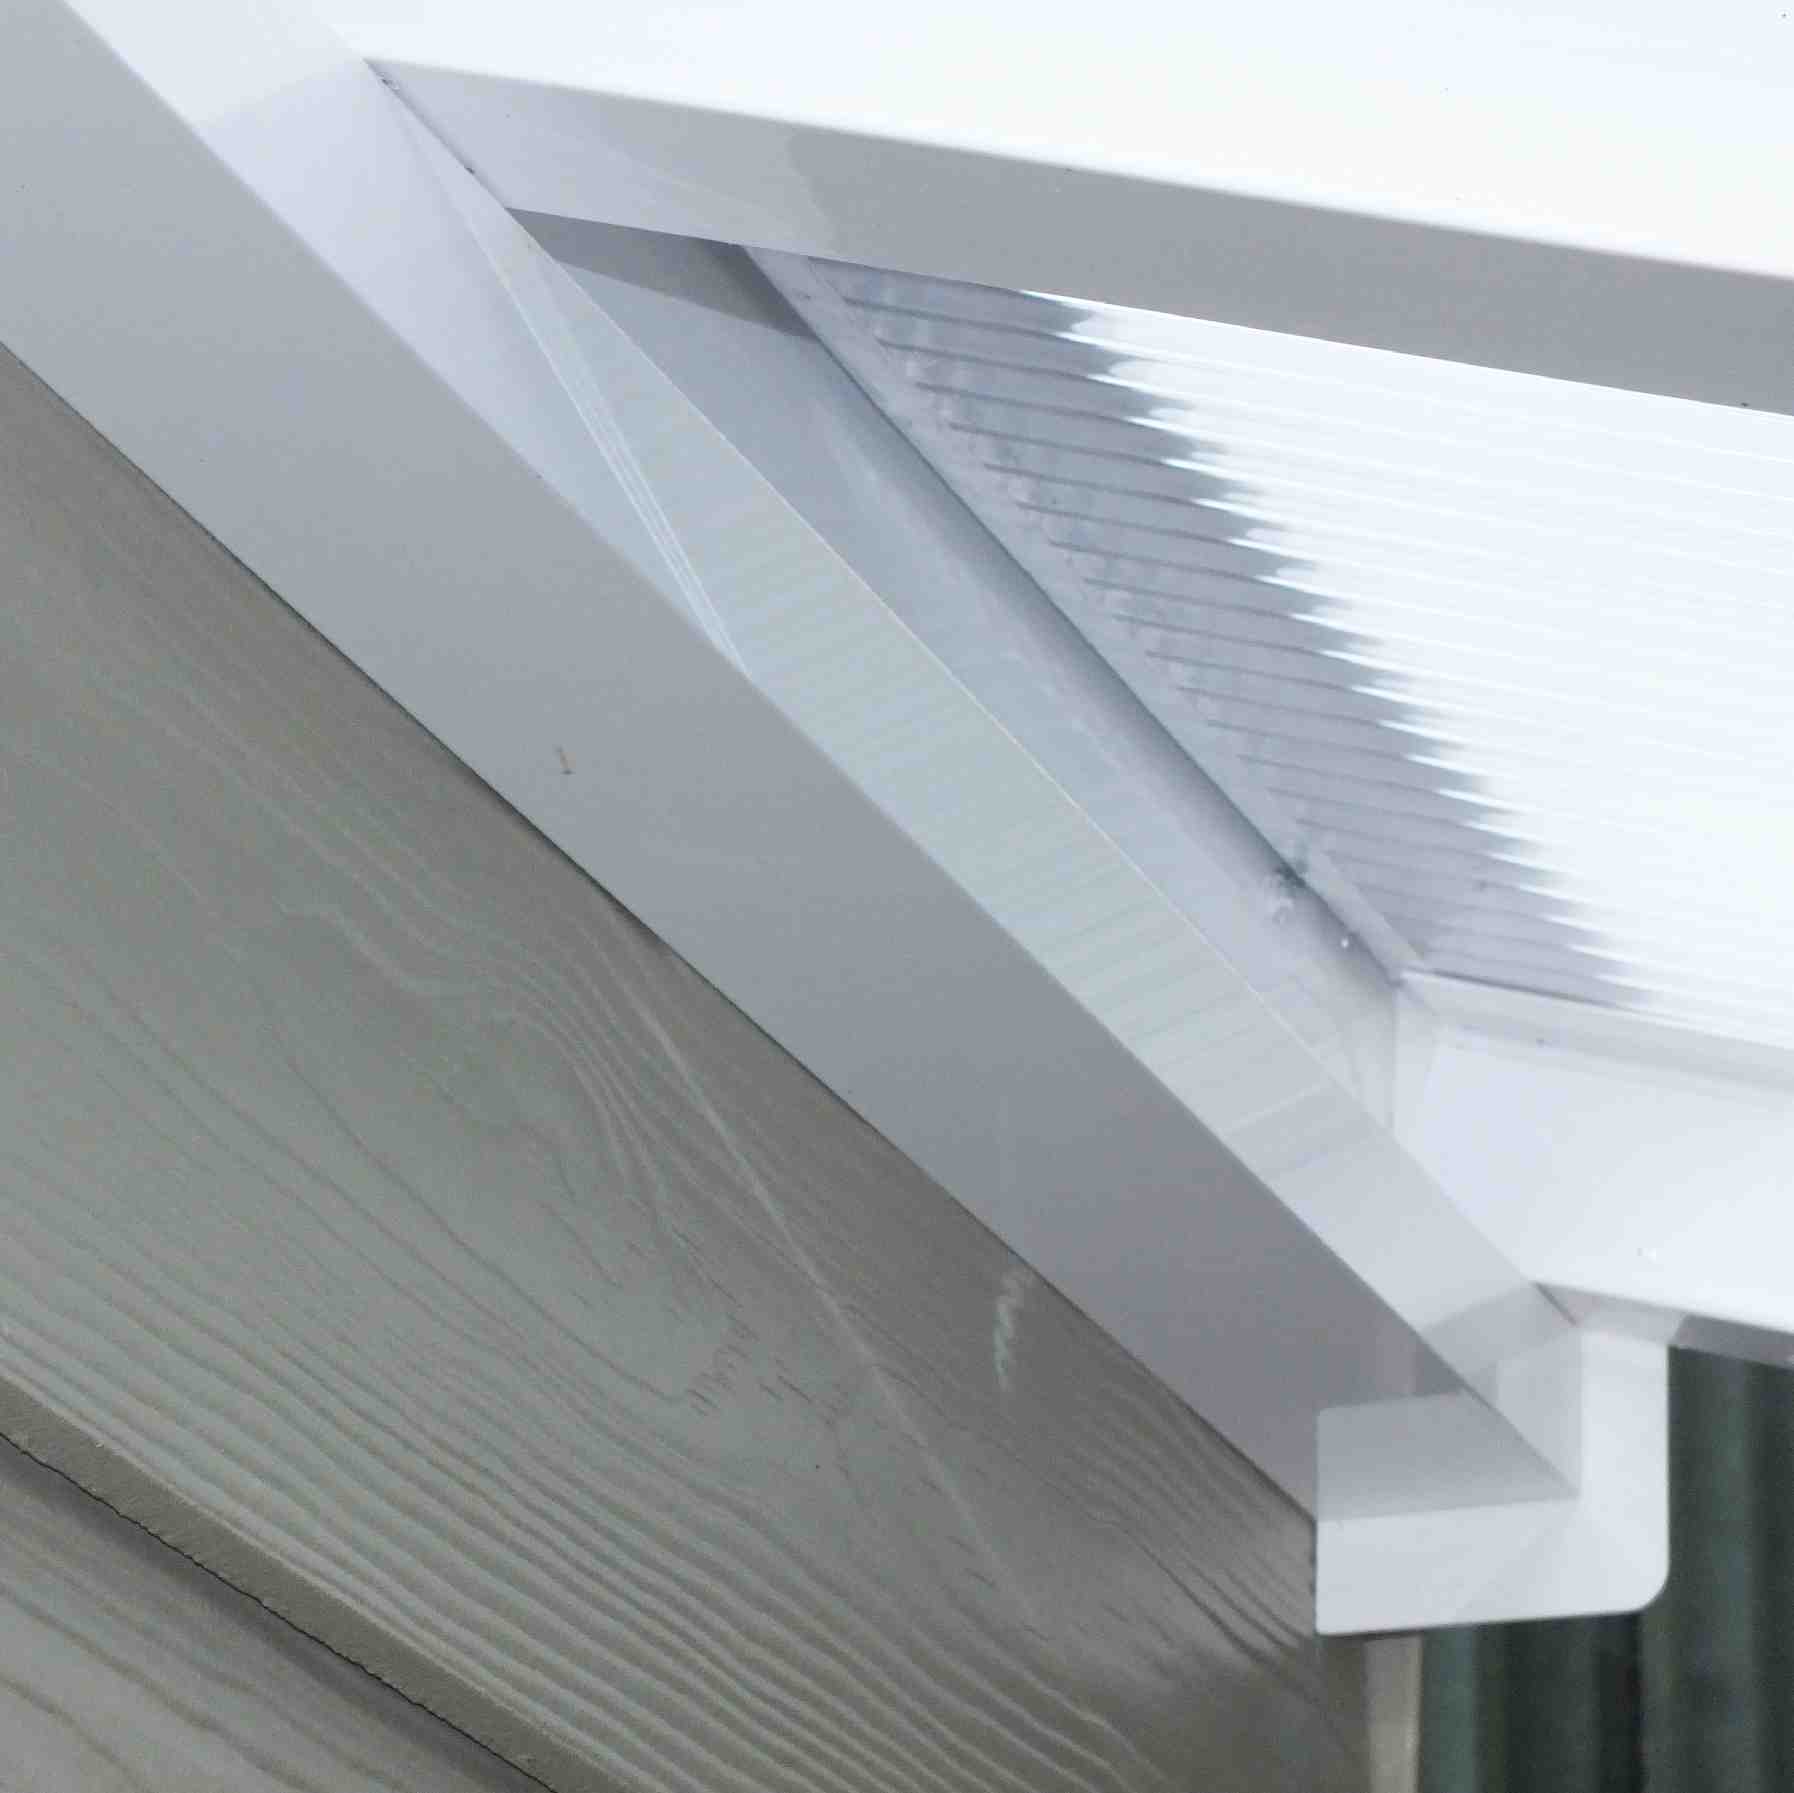 Great deals on Omega Verandah White with 16mm Polycarbonate Glazing - 7.4m (W) x 2.5m (P), (4) Supporting Posts